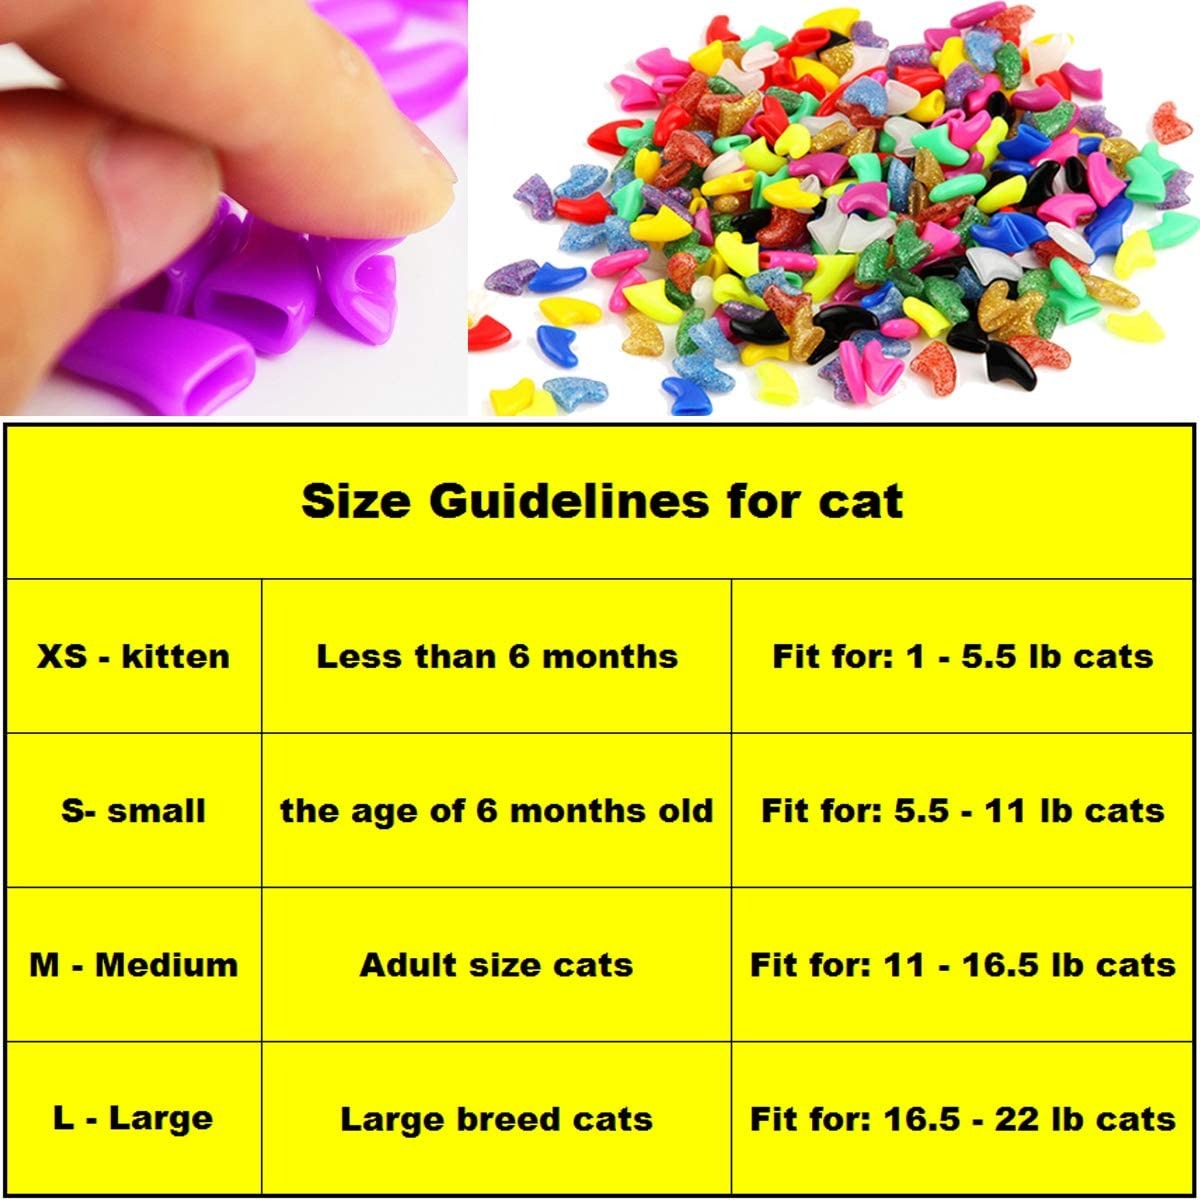 https://theculturedcat.com/wp-content/uploads/2022/03/Claw-Caps-Size-Guidelines.jpg